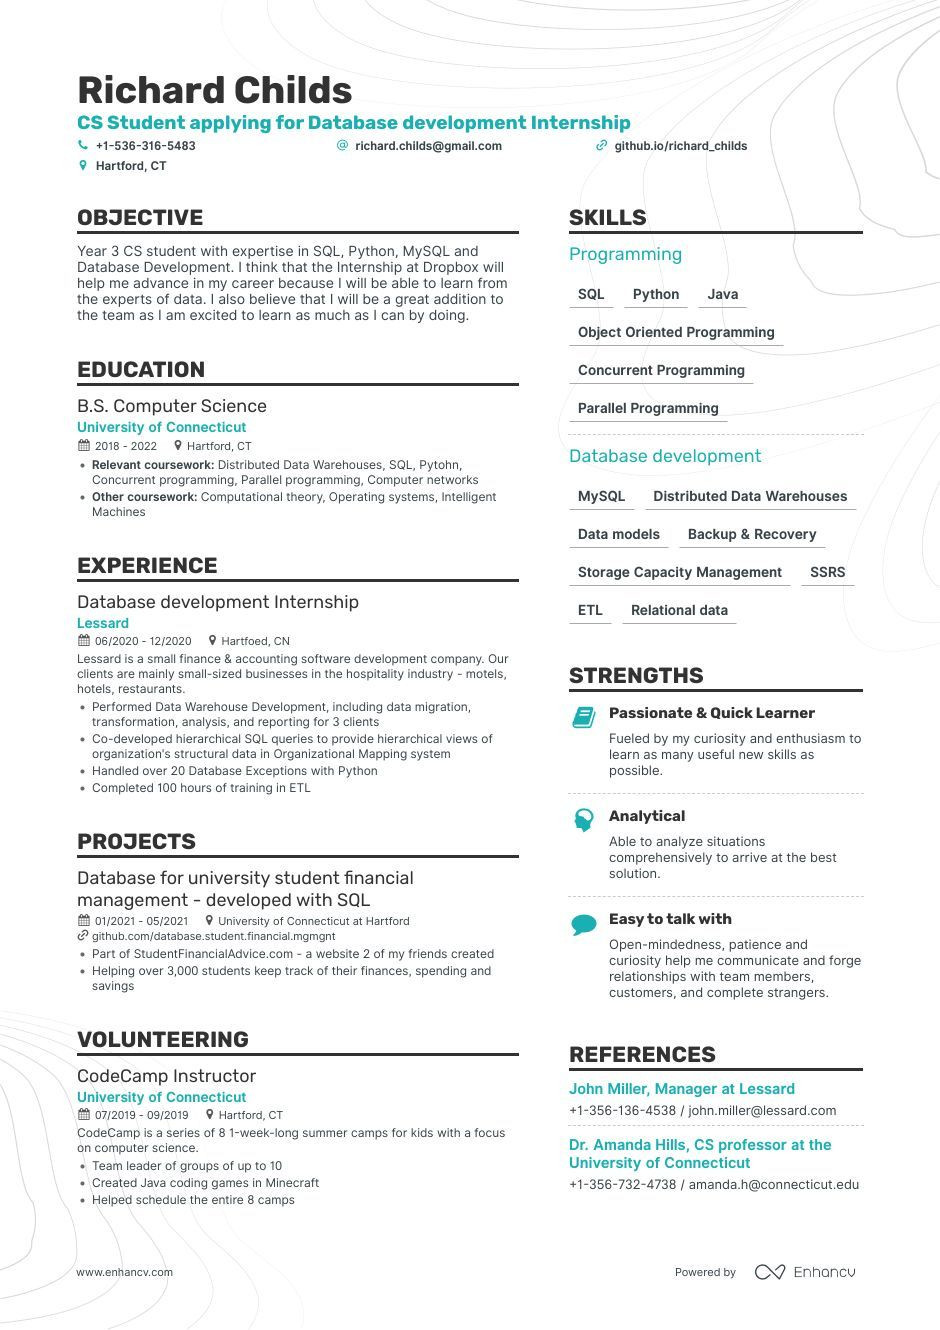 Sample Of A Good Computer Science Resume with No Experience Computer Science Resume Examples & Guide for 2022 (layout, Skills …